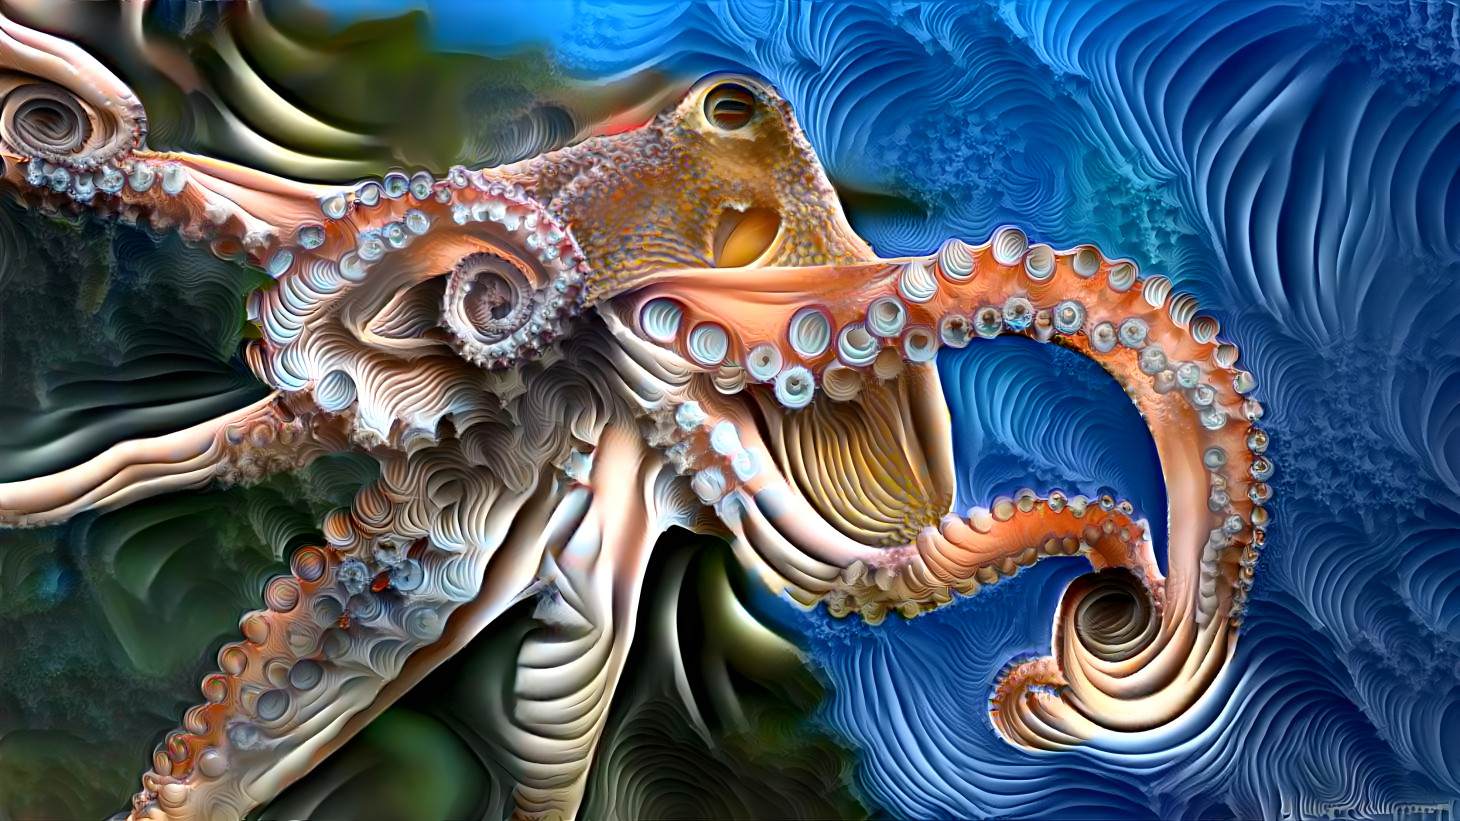 The octopus #1